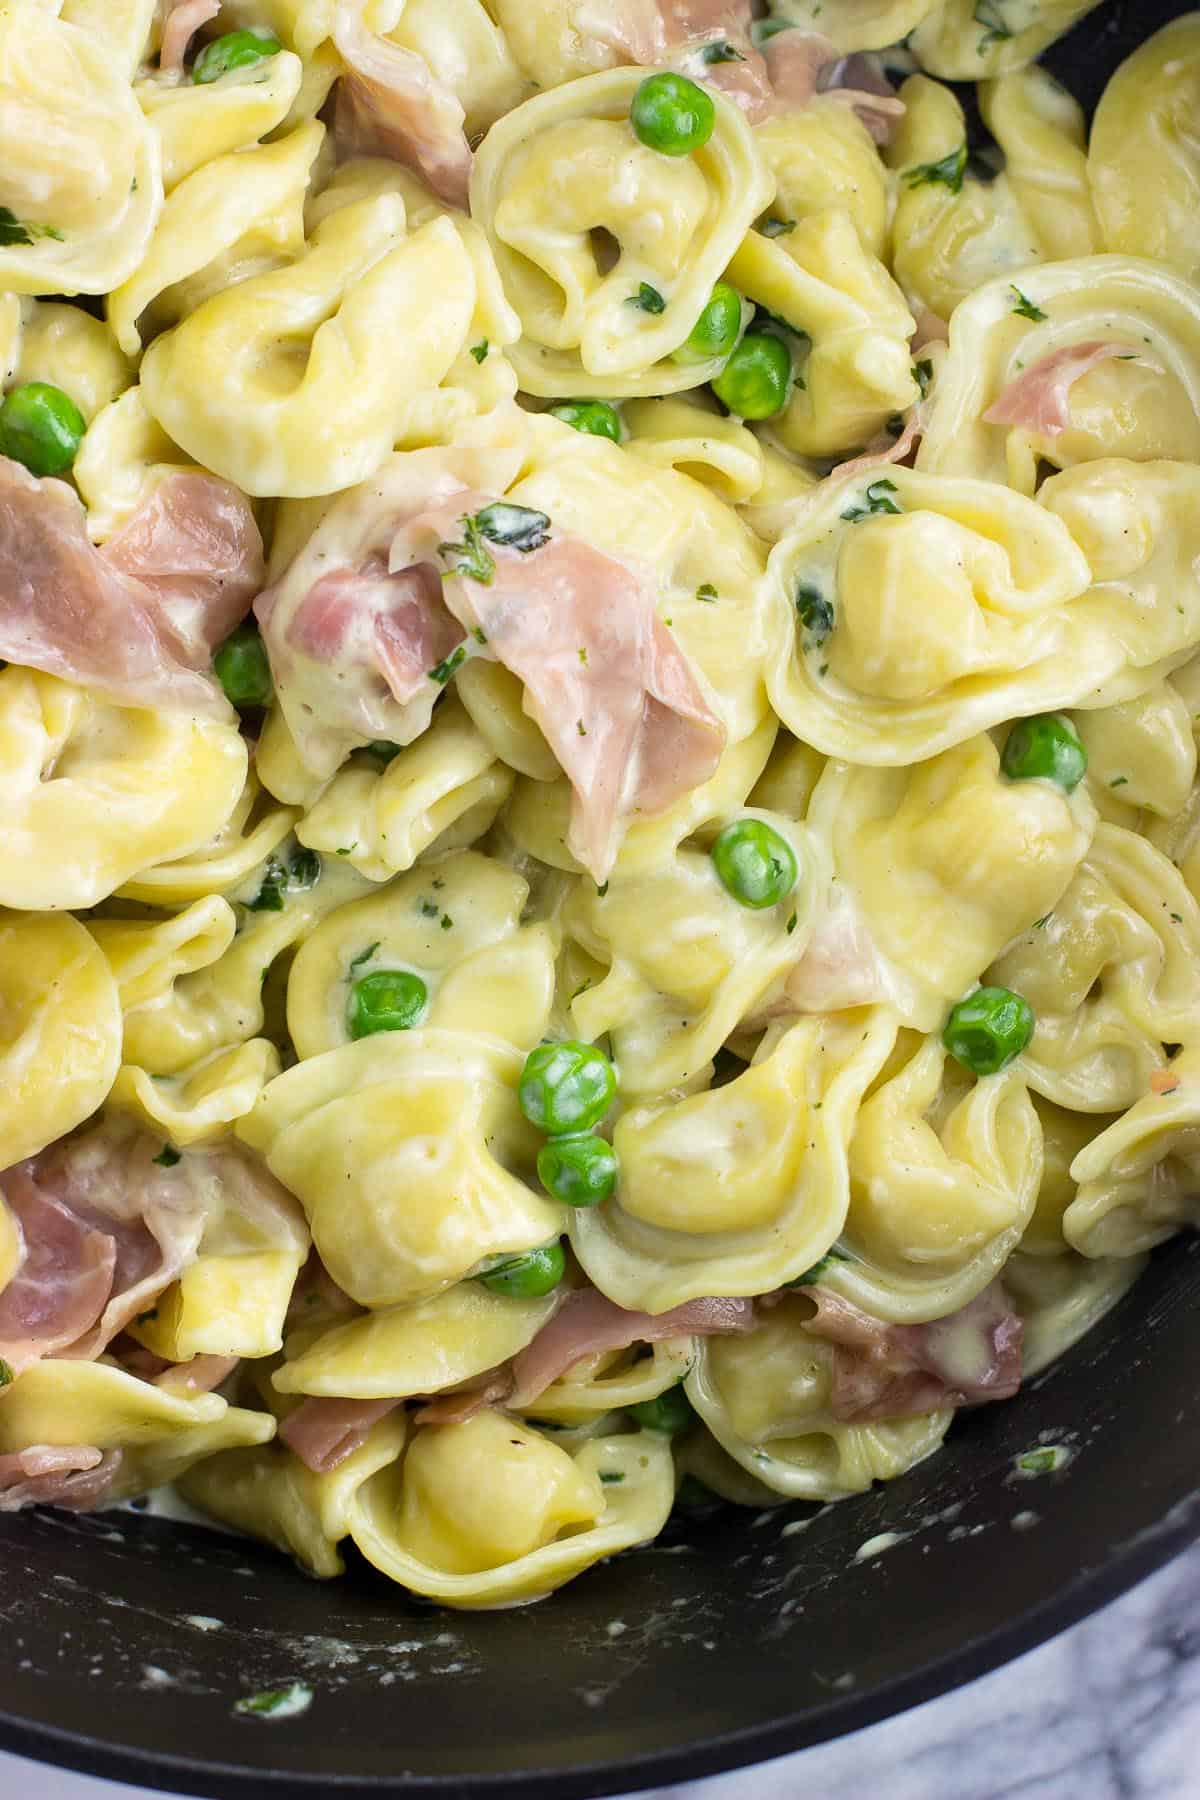 An overhead shot of the tortellini, prosciutto, and peas coated in the cream sauce in the skillet